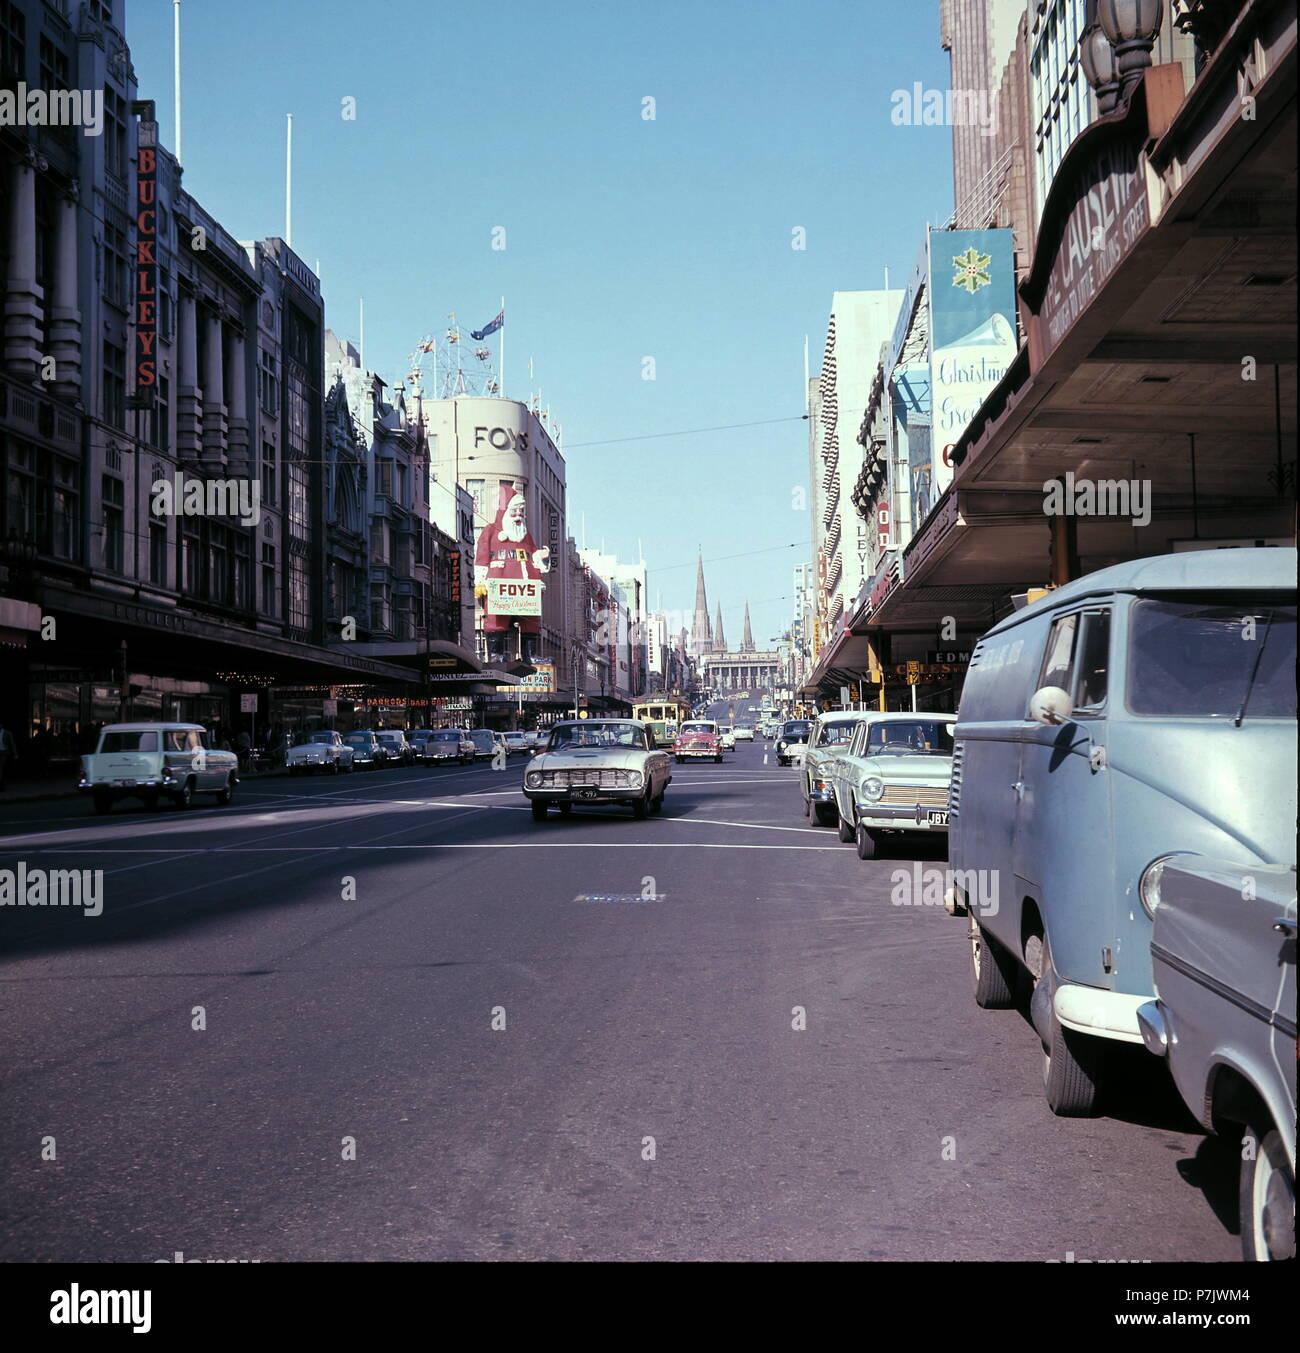 AJAXNETPHOTO. 1964. MELBOURNE, AUSTRALIA. - BOURKE STREET LOOKING NORTH WEST - FOYS DEPARTMENT STORE VISIBLE ON THE LEFT WITH SANTA CLAUS PLACARD; BUCKLEY'S ON NEAR LEFT; THE CAUSEWAY ENTRANCE LEADING TO LITTLE COLLINS STREET EXTREME RIGHT ABOVE VOLKSWAGEN CAMPER VAN.  PHOTO:JONATHAN EASTLAND/AJAX REF:C65108 3 58 Stock Photo